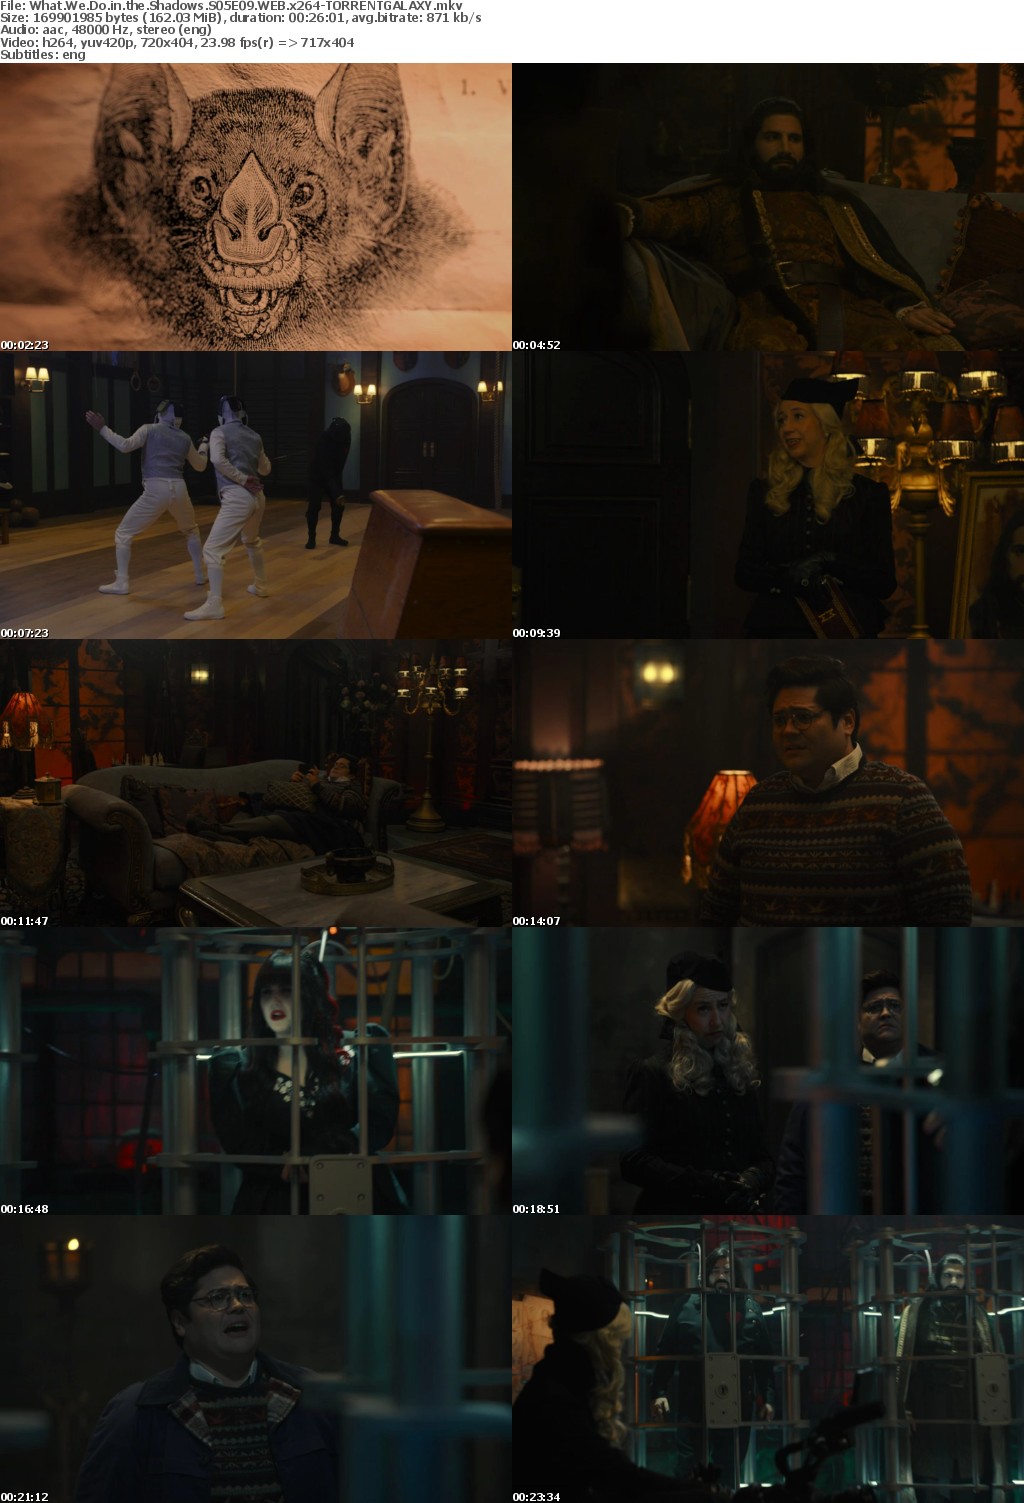 What We Do in the Shadows S05E09 WEB x264-GALAXY